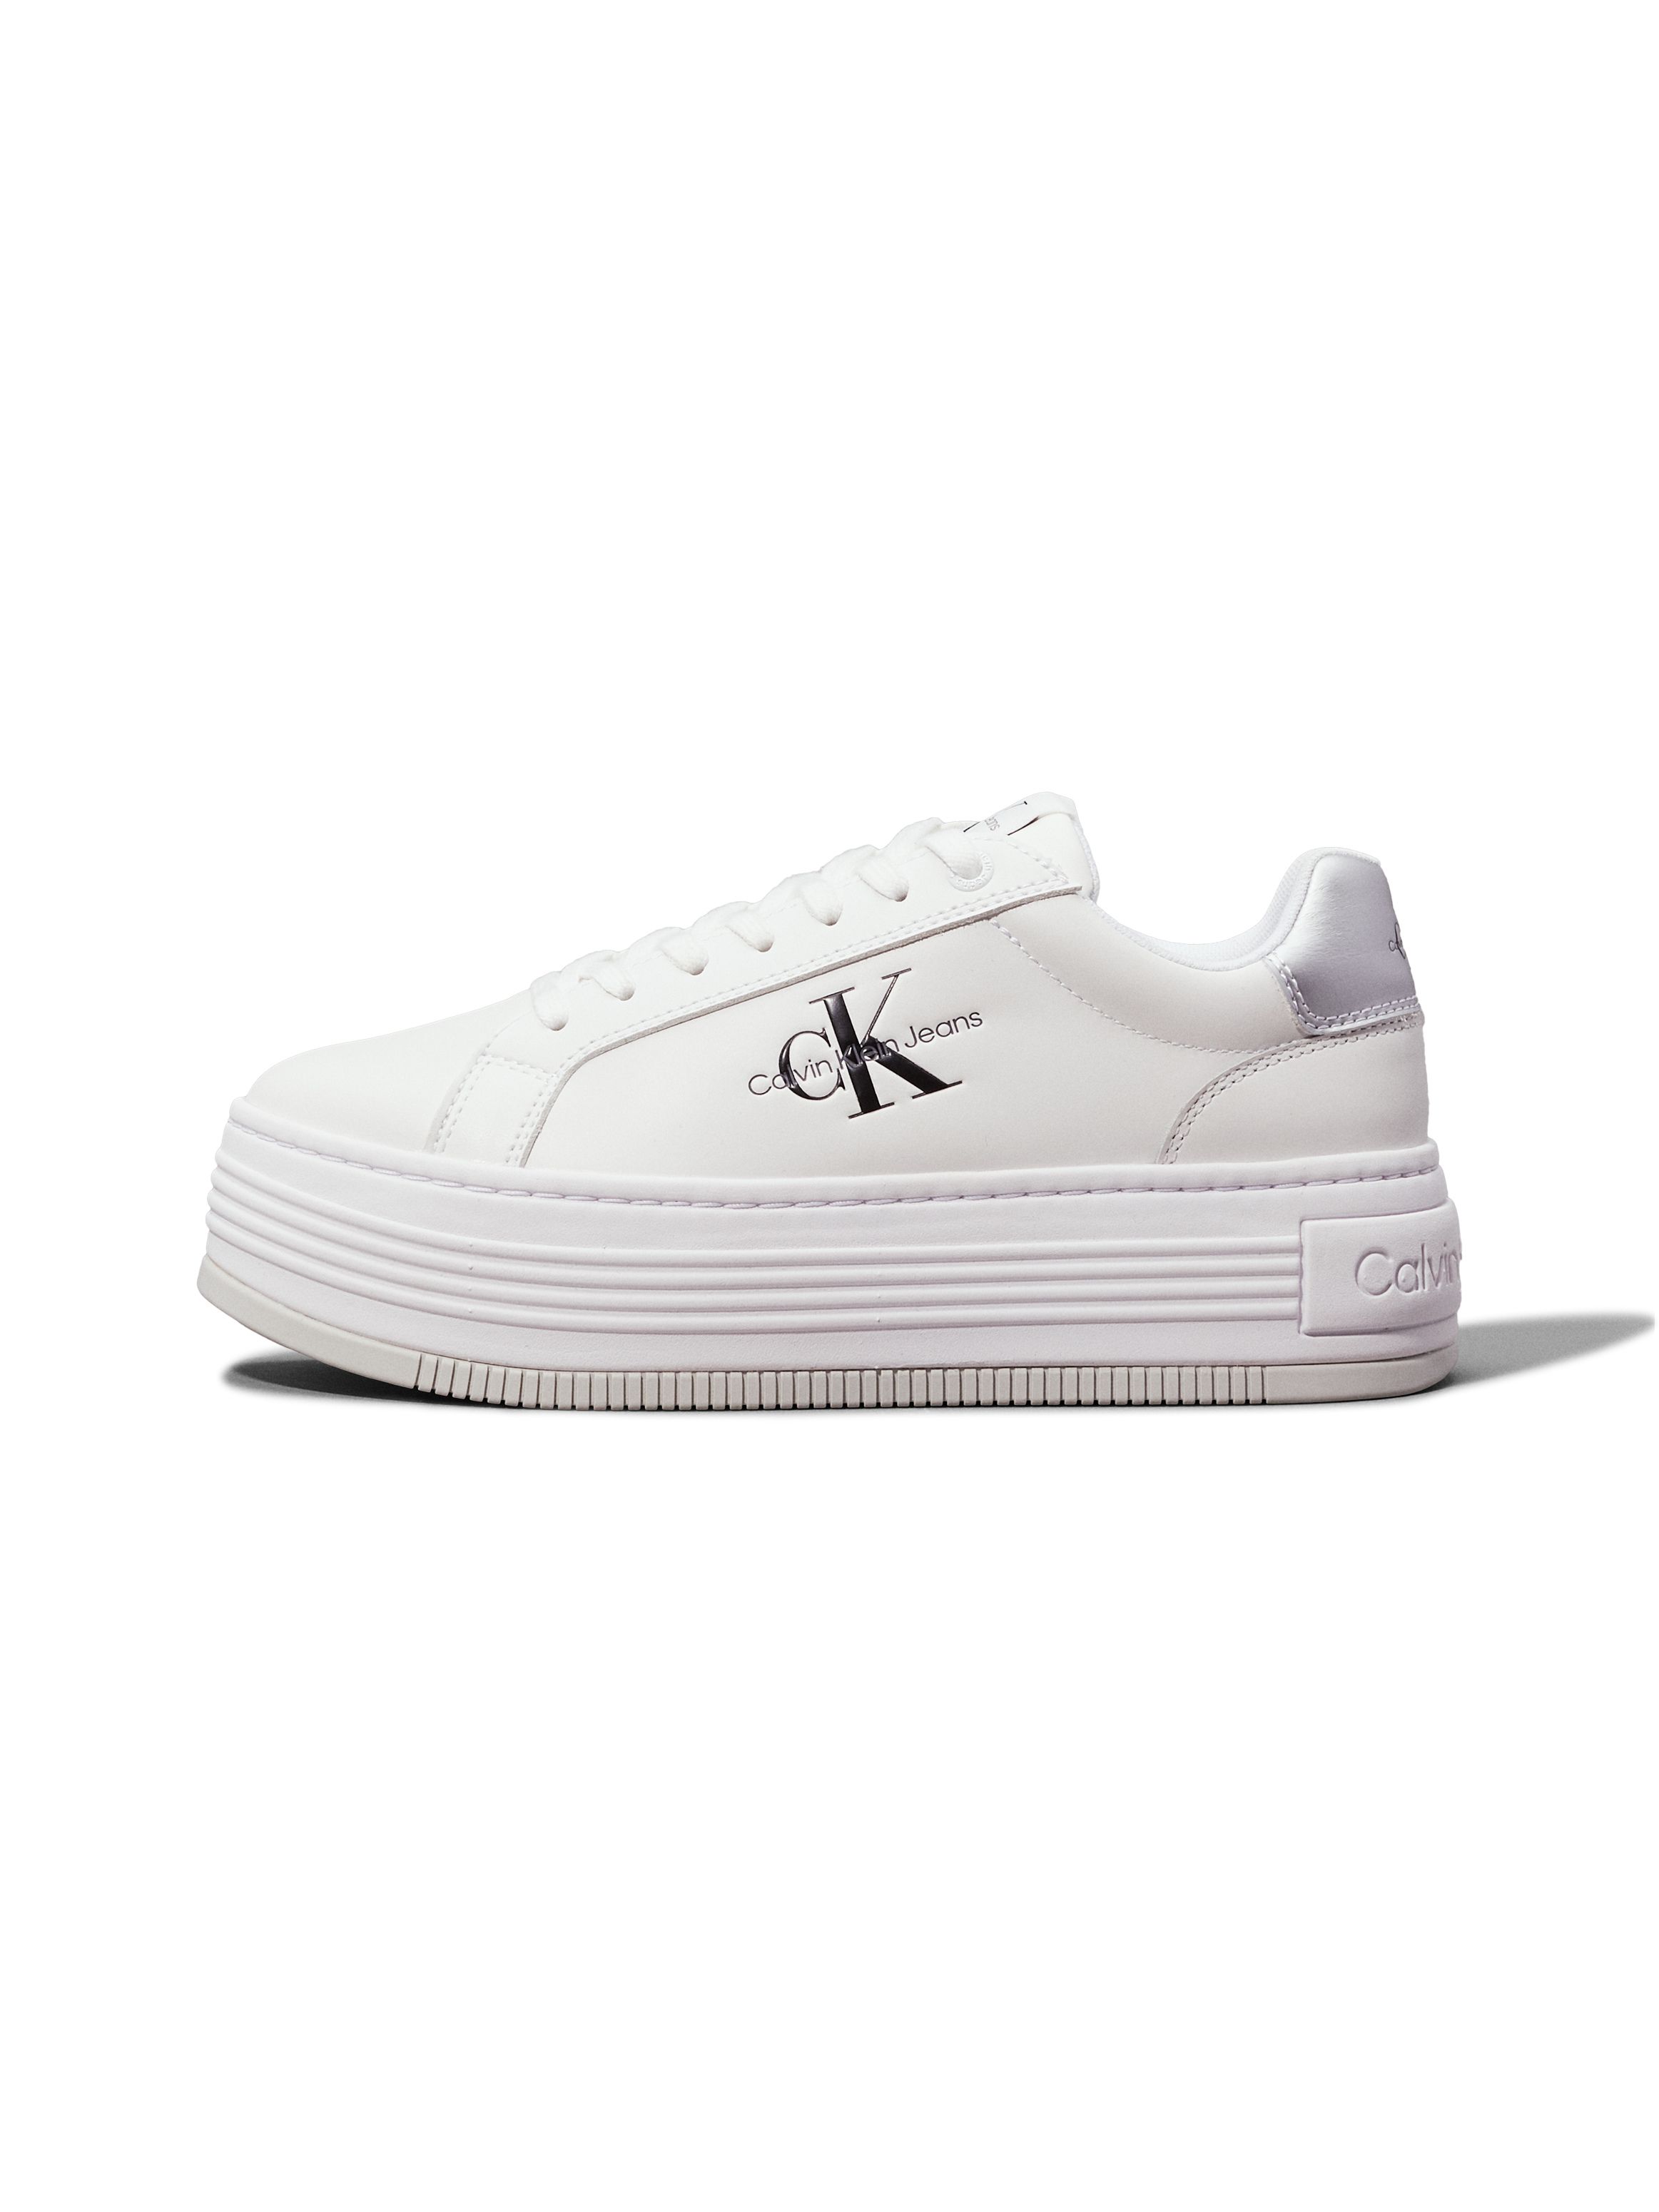 Calvin Klein Jeans Thick Sole Sneakers